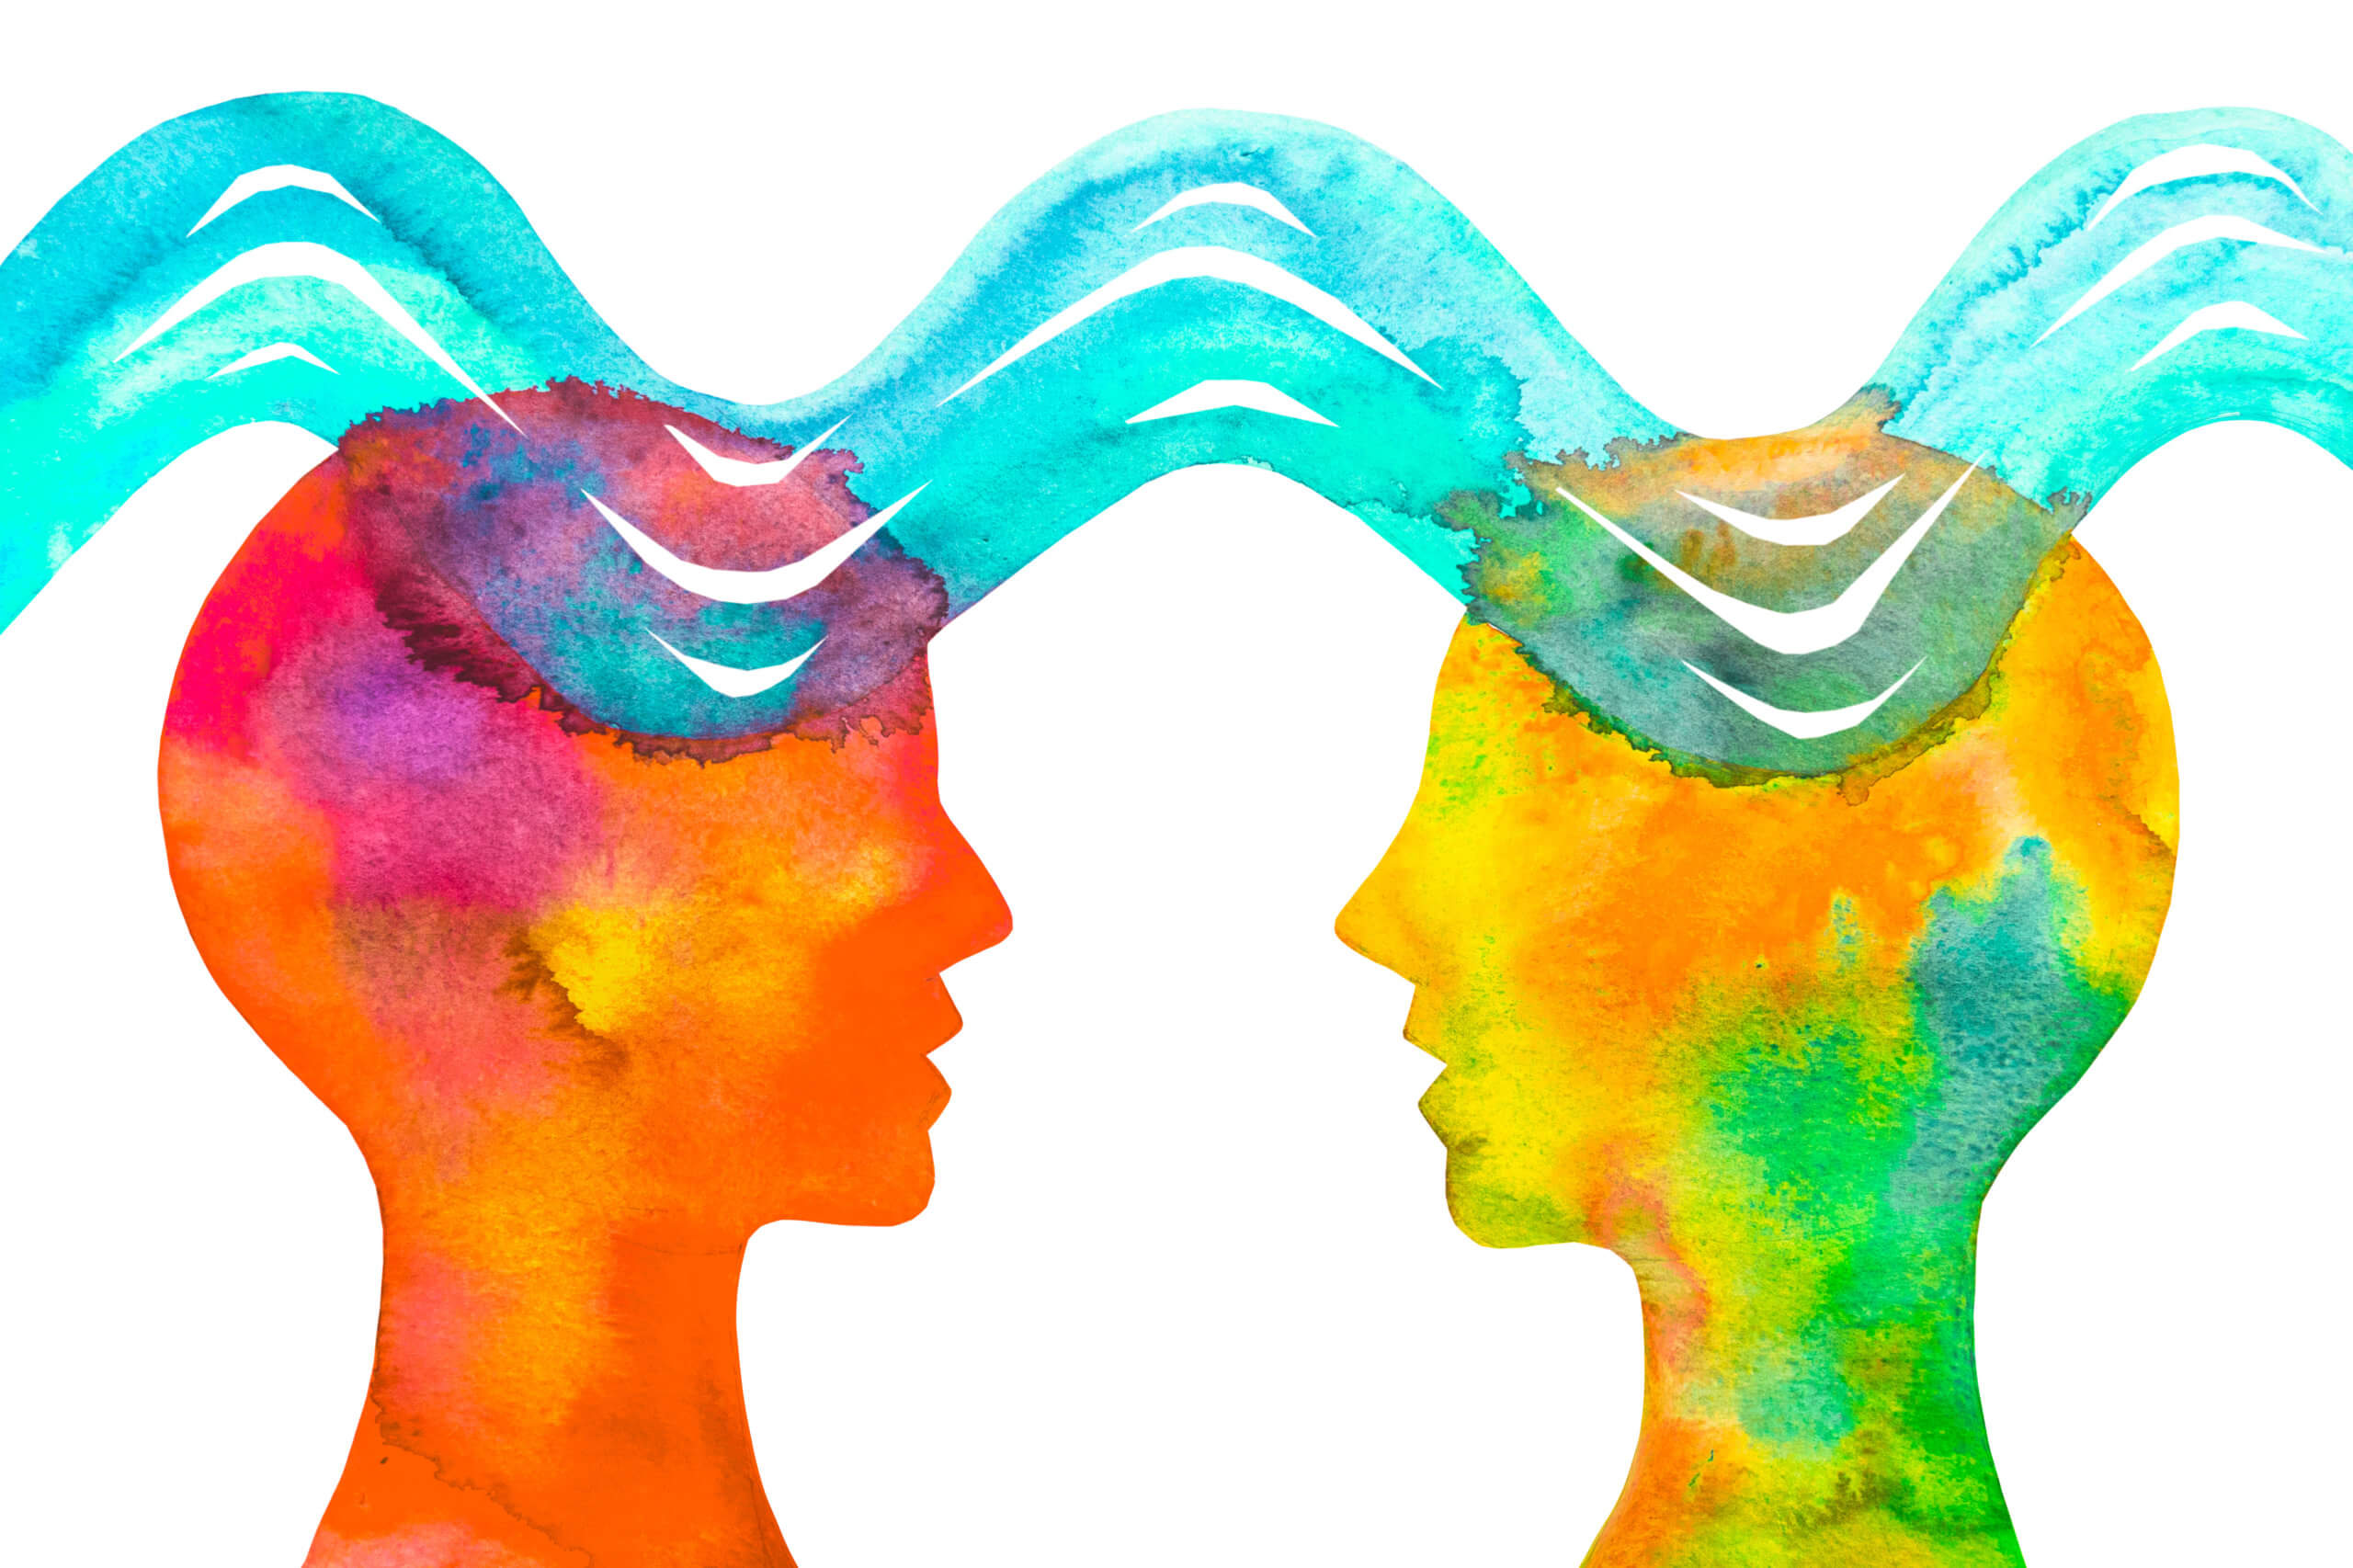 Watercolor Painting of two people connected by a wave